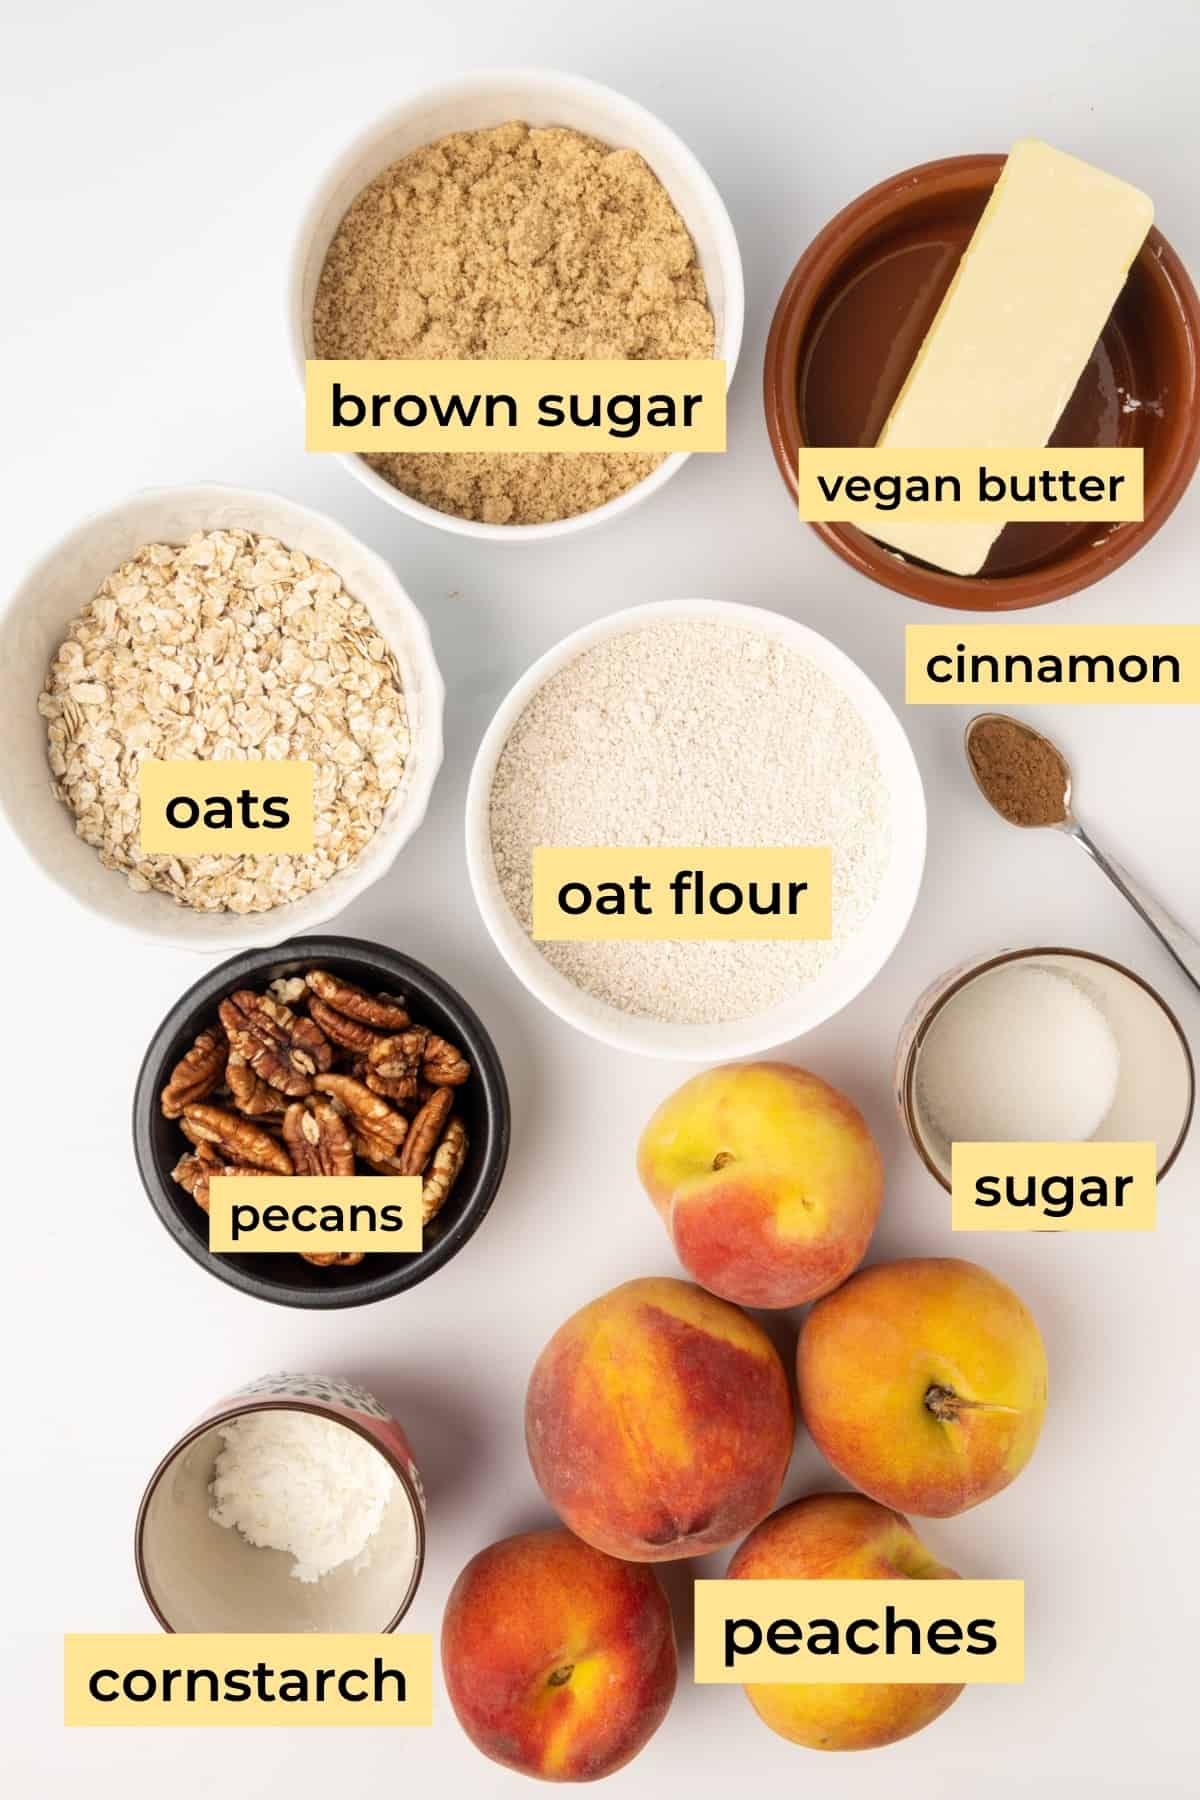 Ingredients for vegan peach crisp arranged on a white surface.